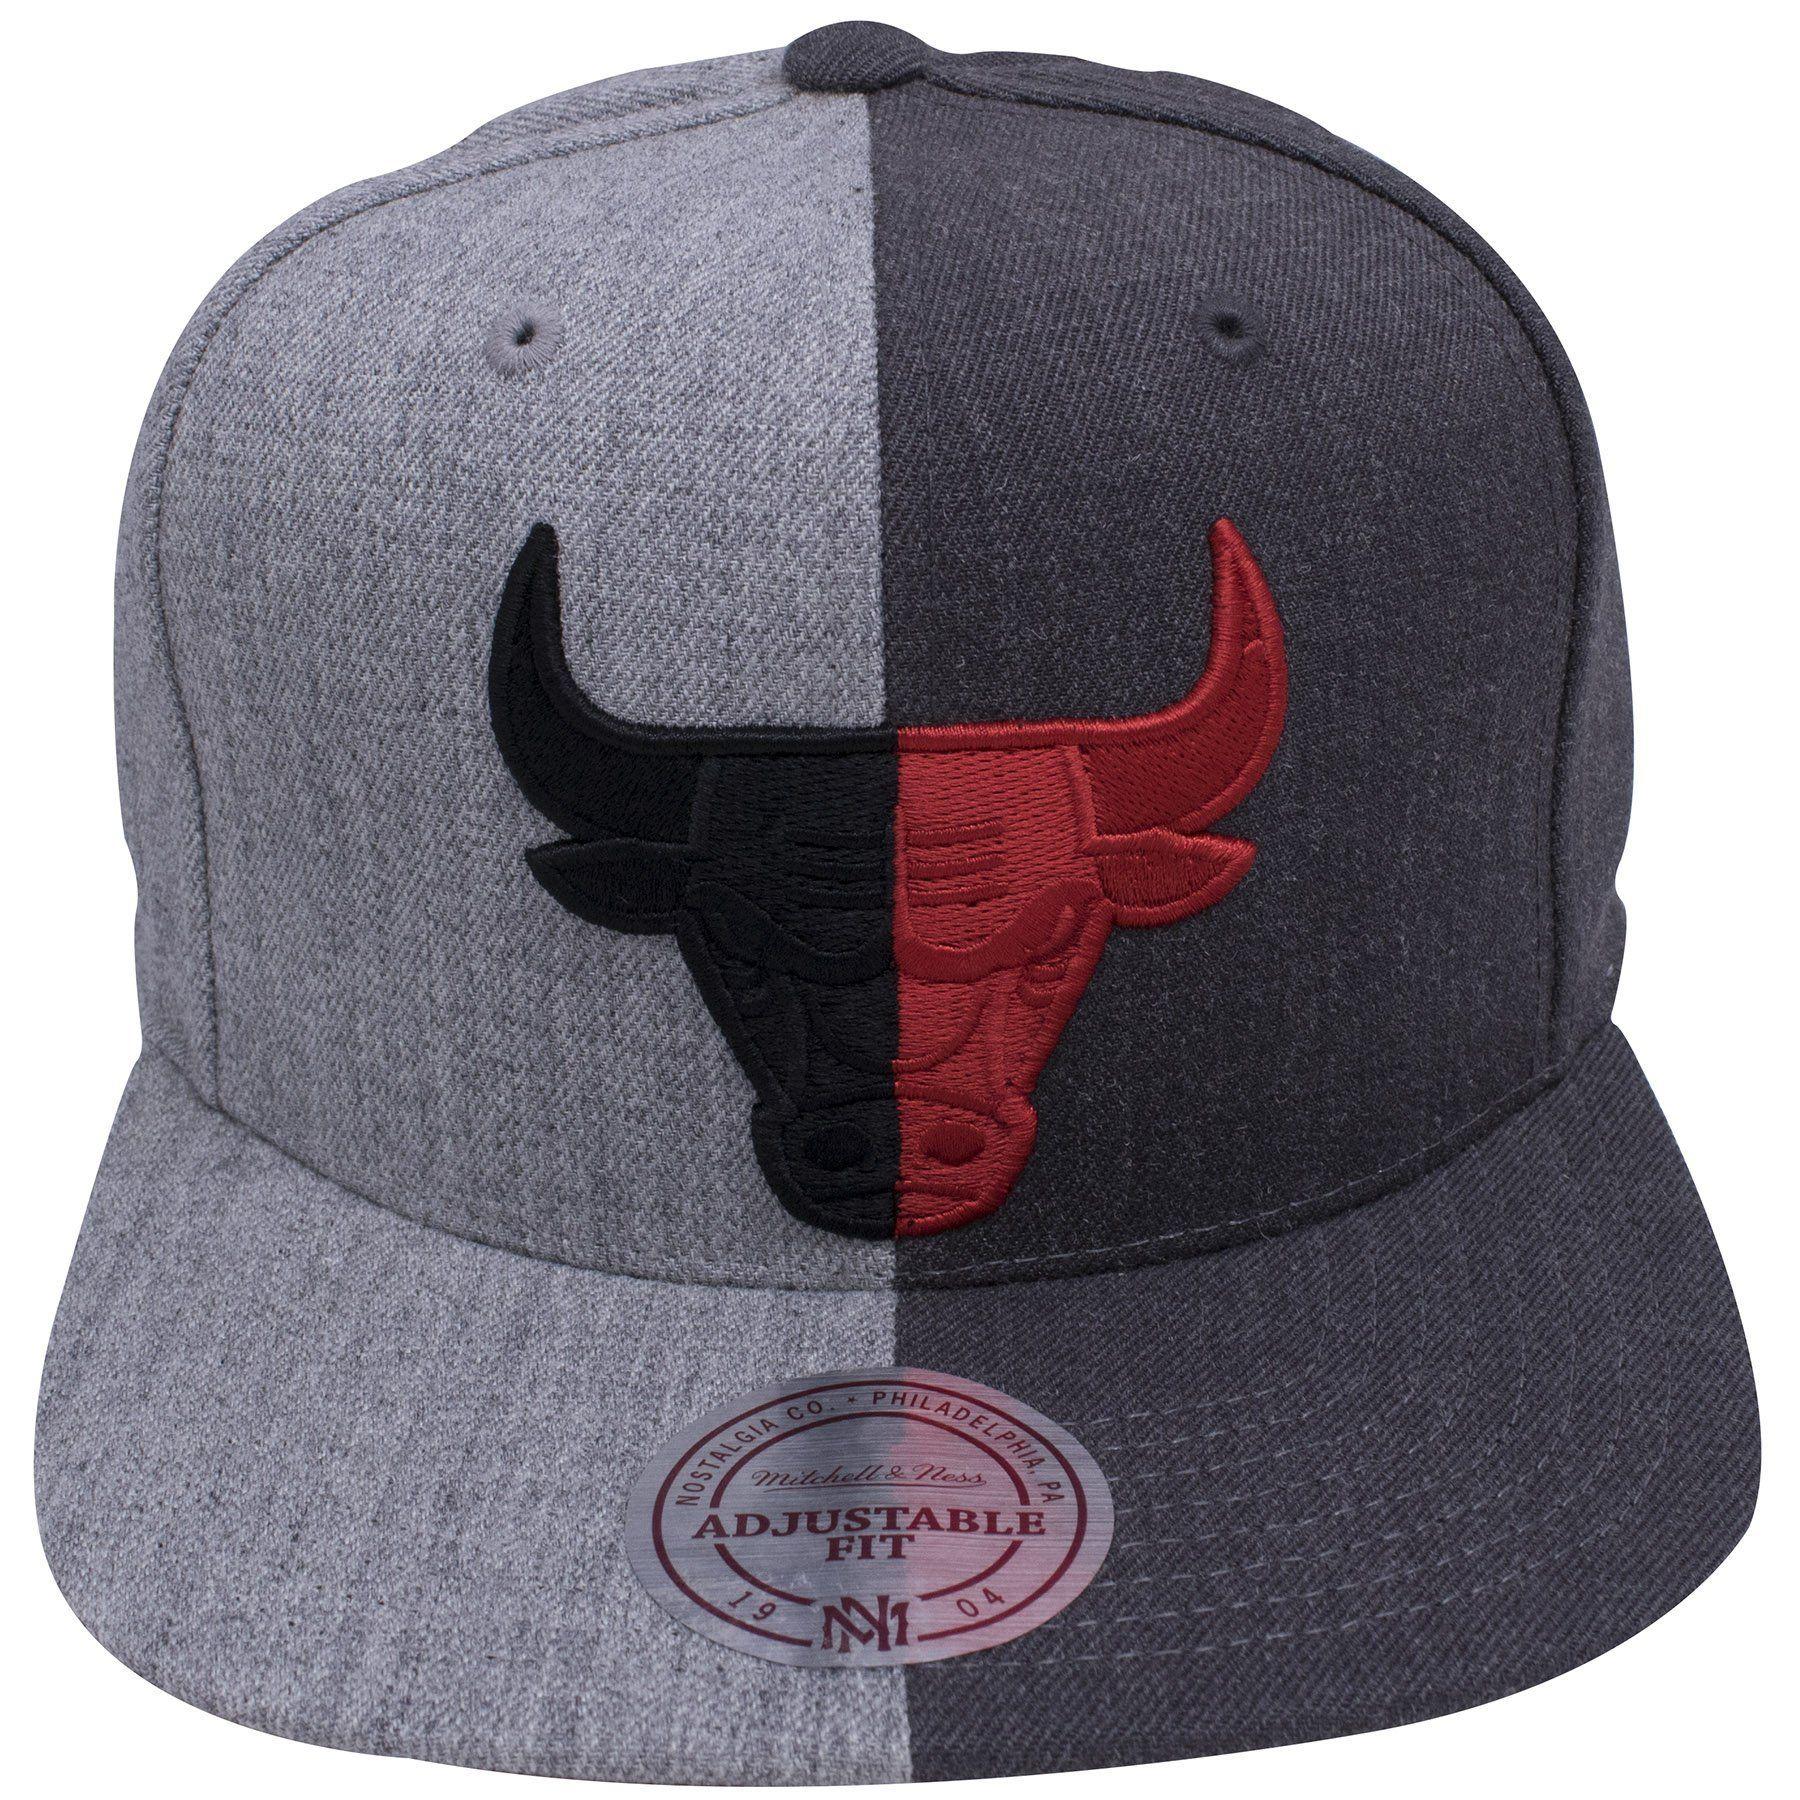 Two Red Bulls Logo - Chicago Bulls Two Tone Black and Red Heather Gray Snapback Hat